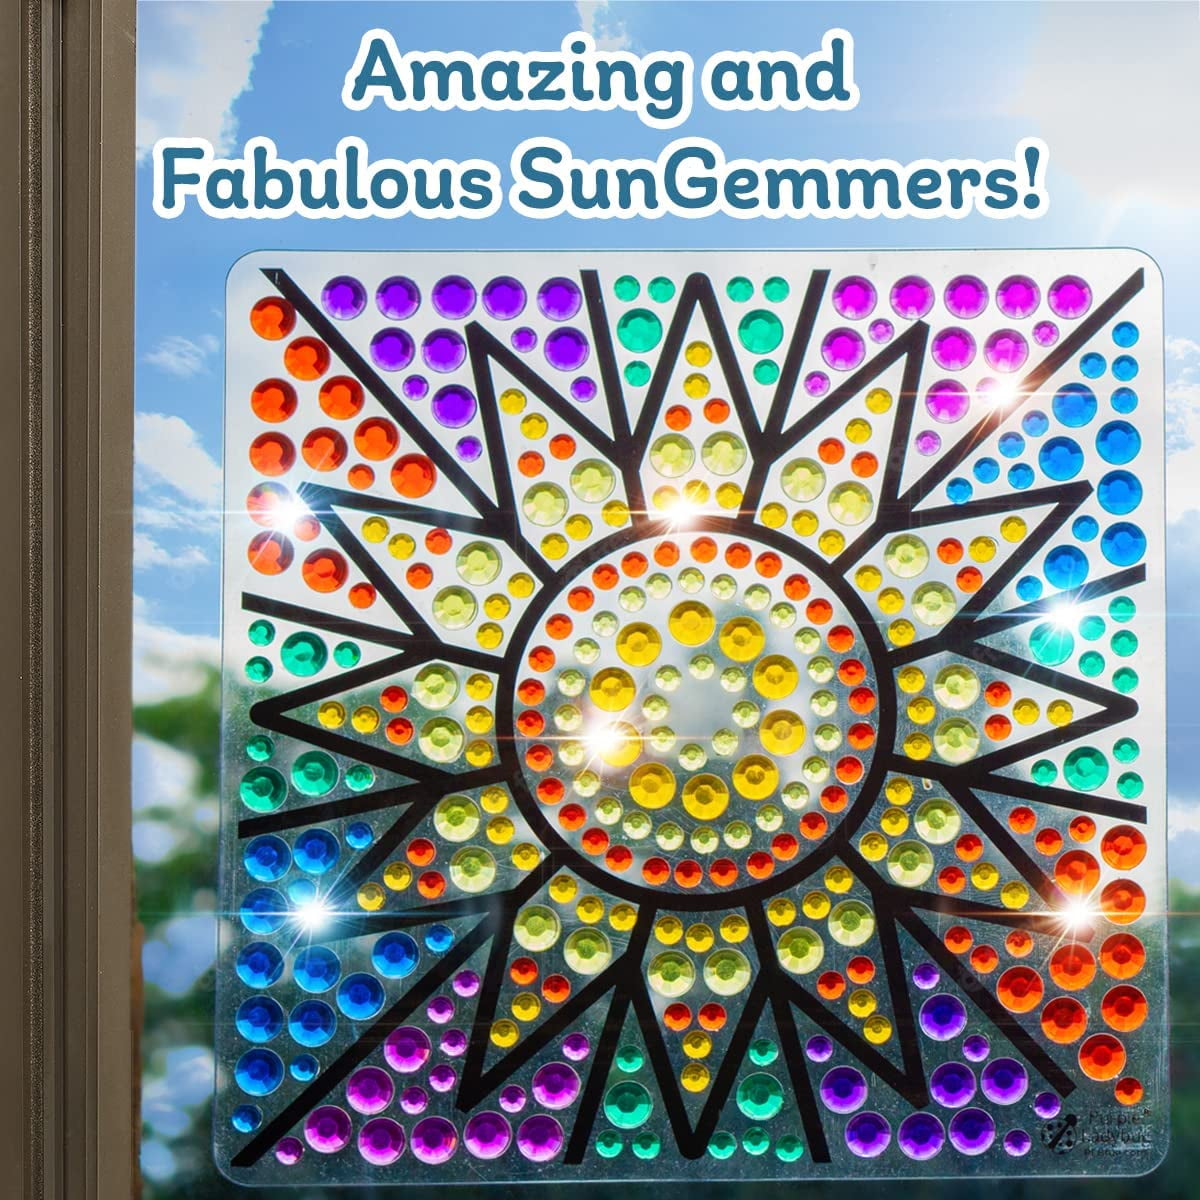 Purple Ladybug SUNGEMMERS Window Art Suncatcher Kits for Kids Crafts Ages 6-8 + - Great for 6 Year Old Girl, Birthday Gifts for 7 Year Old Girl - Fun